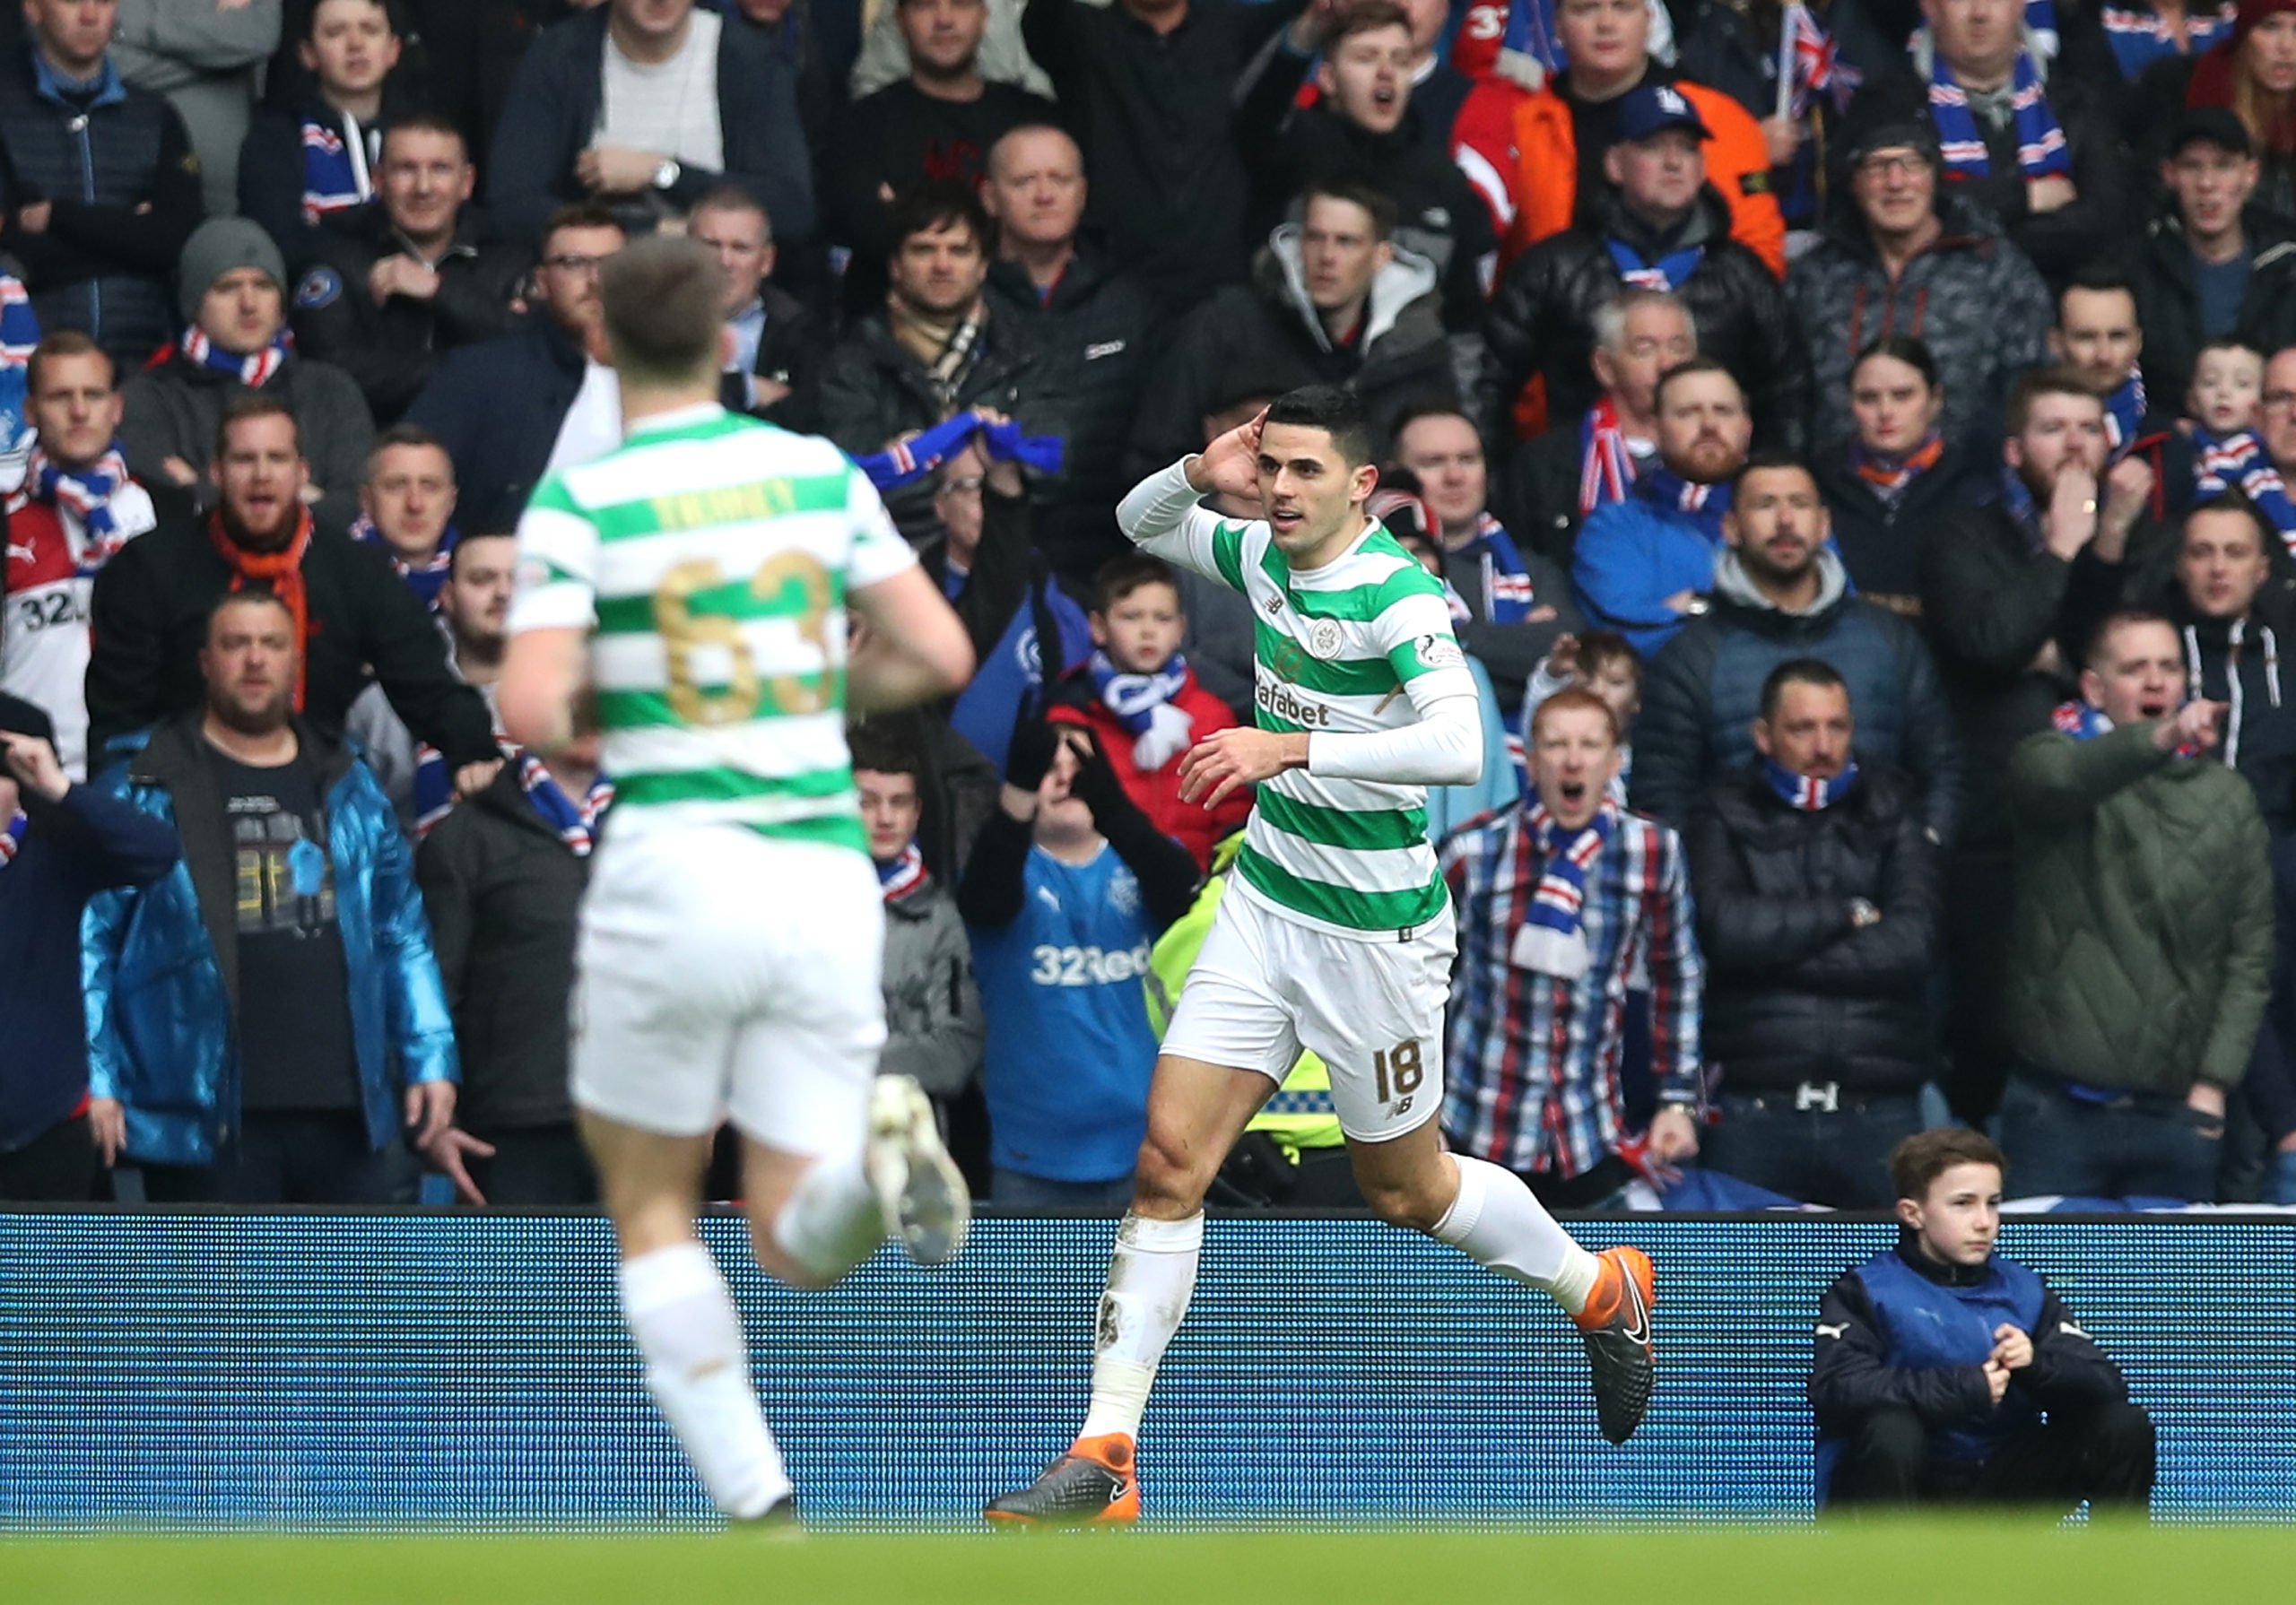 Rivals kickstart the conspiracy theories ahead of Celtic clash